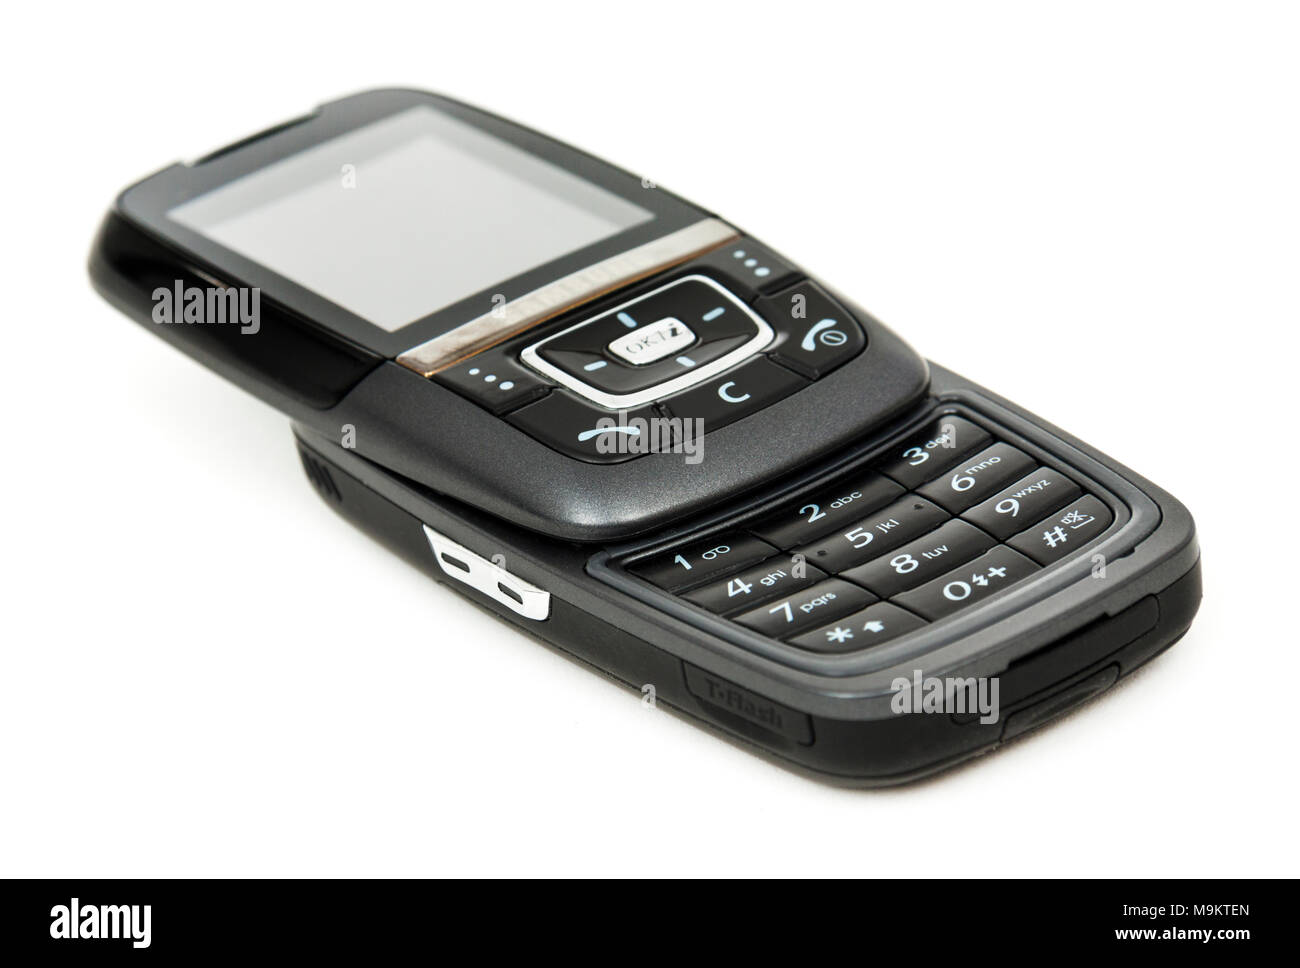 Samsung SGH-D600 mobile phone from 2005, with a 2MP camera, weighing 103g and featuring a WAP browser to (very slowly) access the Internet. Stock Photo